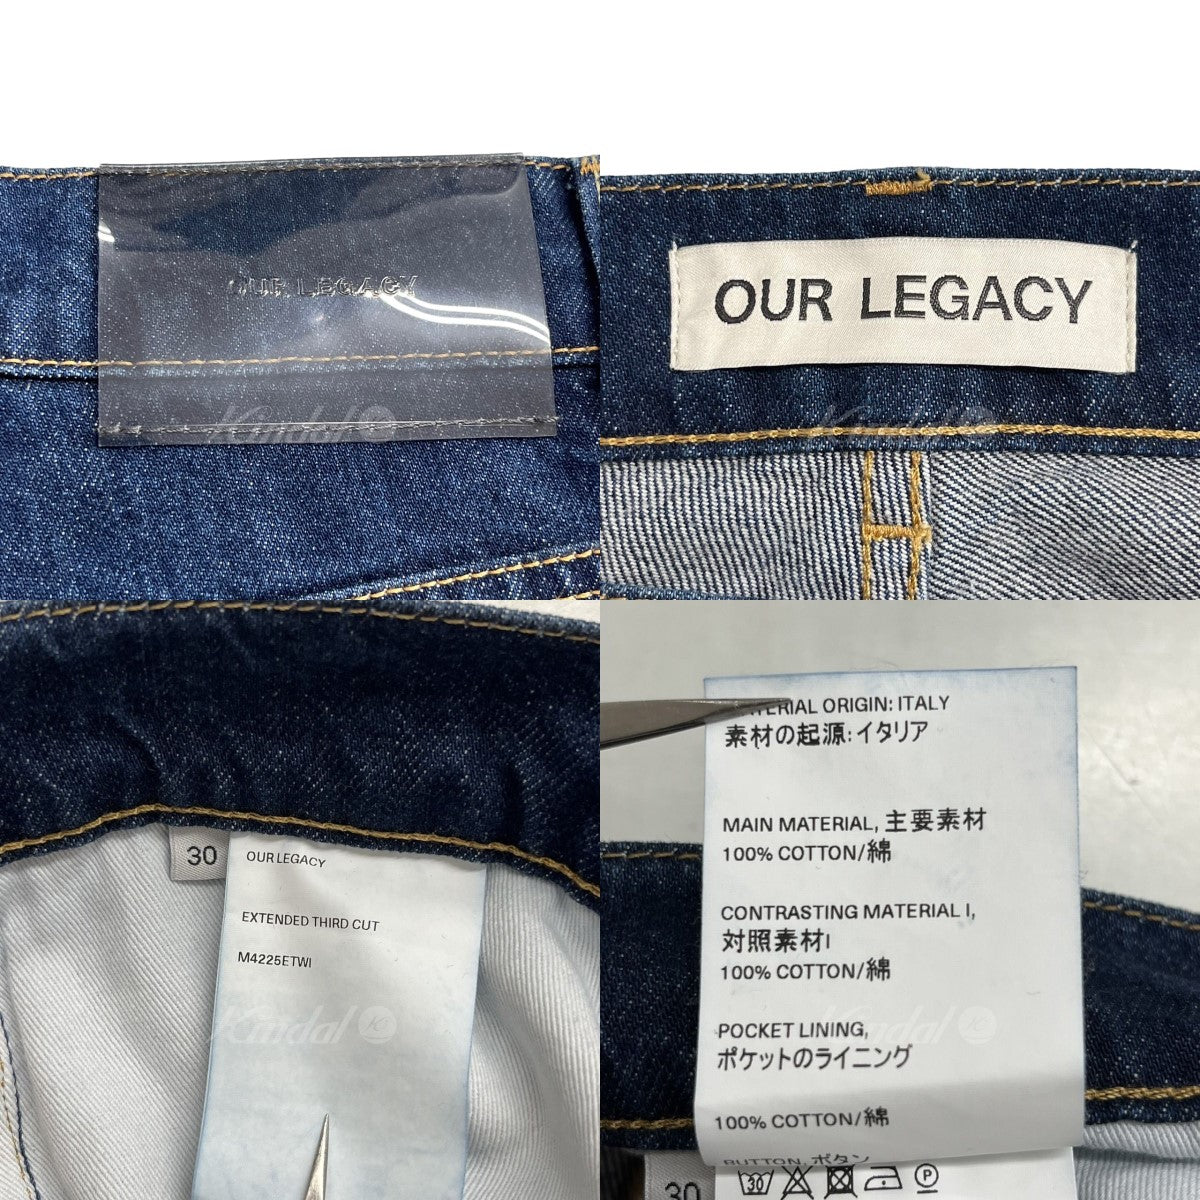 OUR LEGACY(アワーレガシー) 22AW EXTENDED THIRD CUT 切替デニム ...